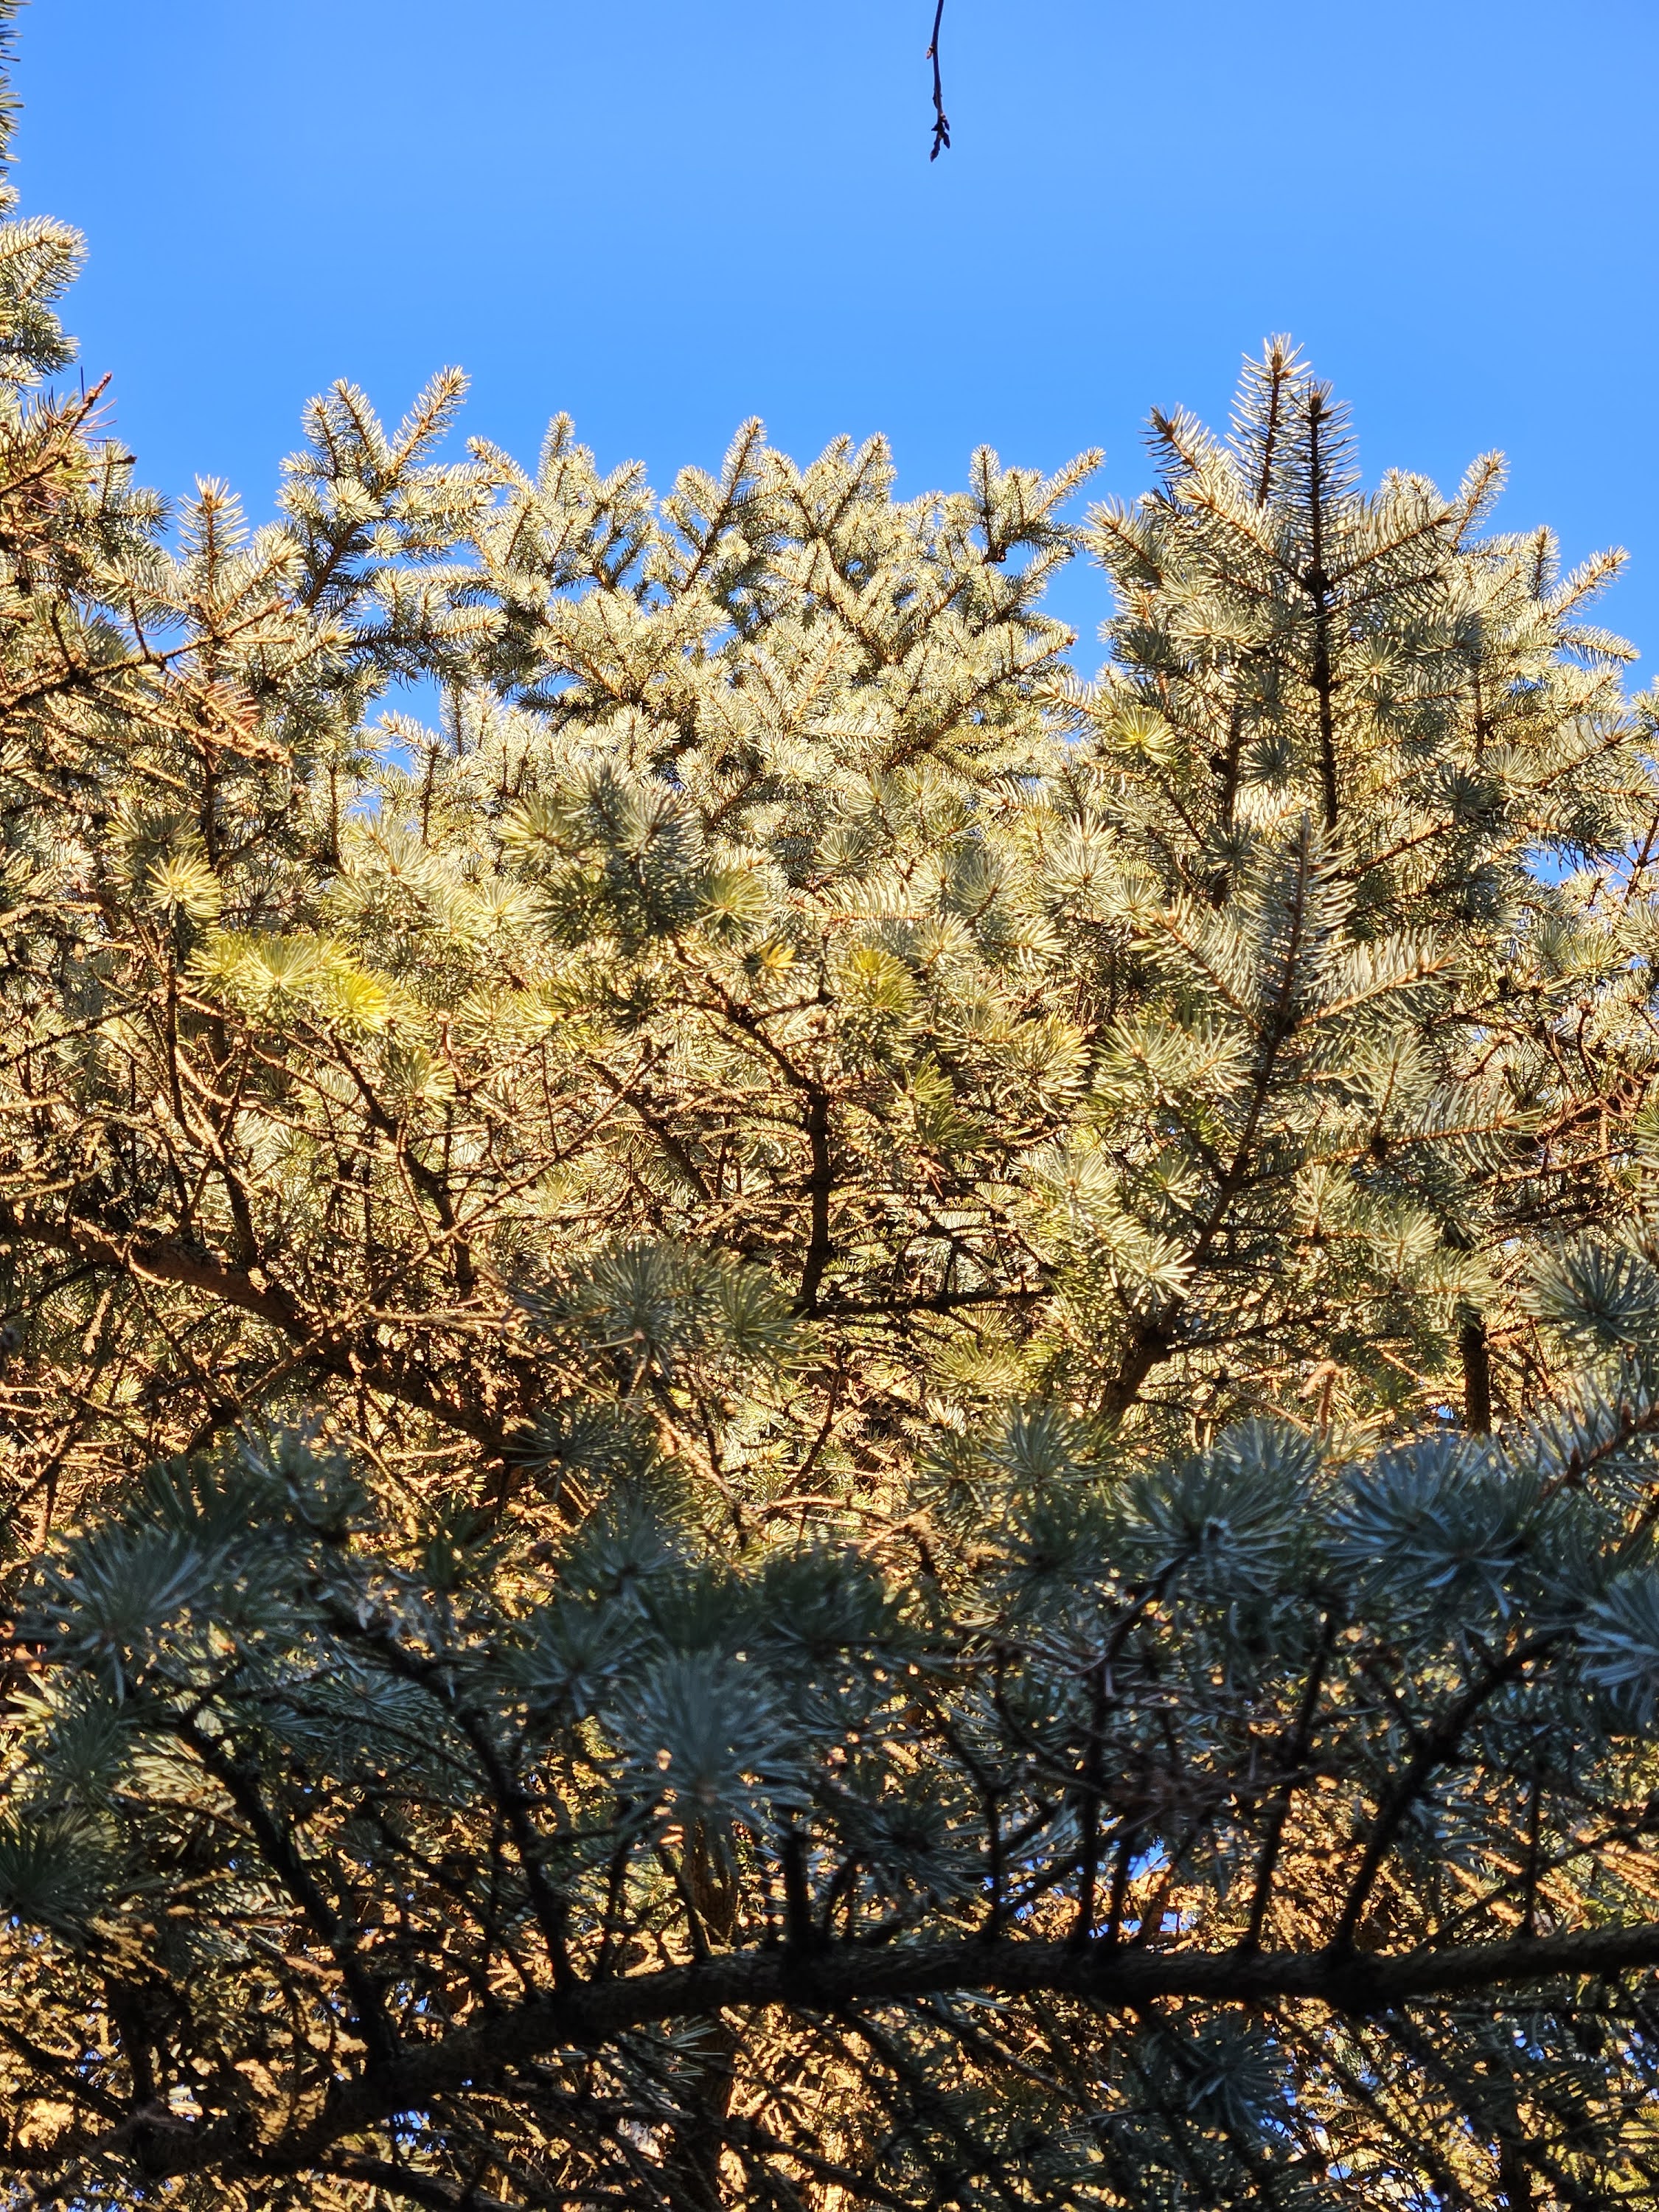 Samsung Galaxy S23 Plus photo of a pine tree outside with a blue sky.